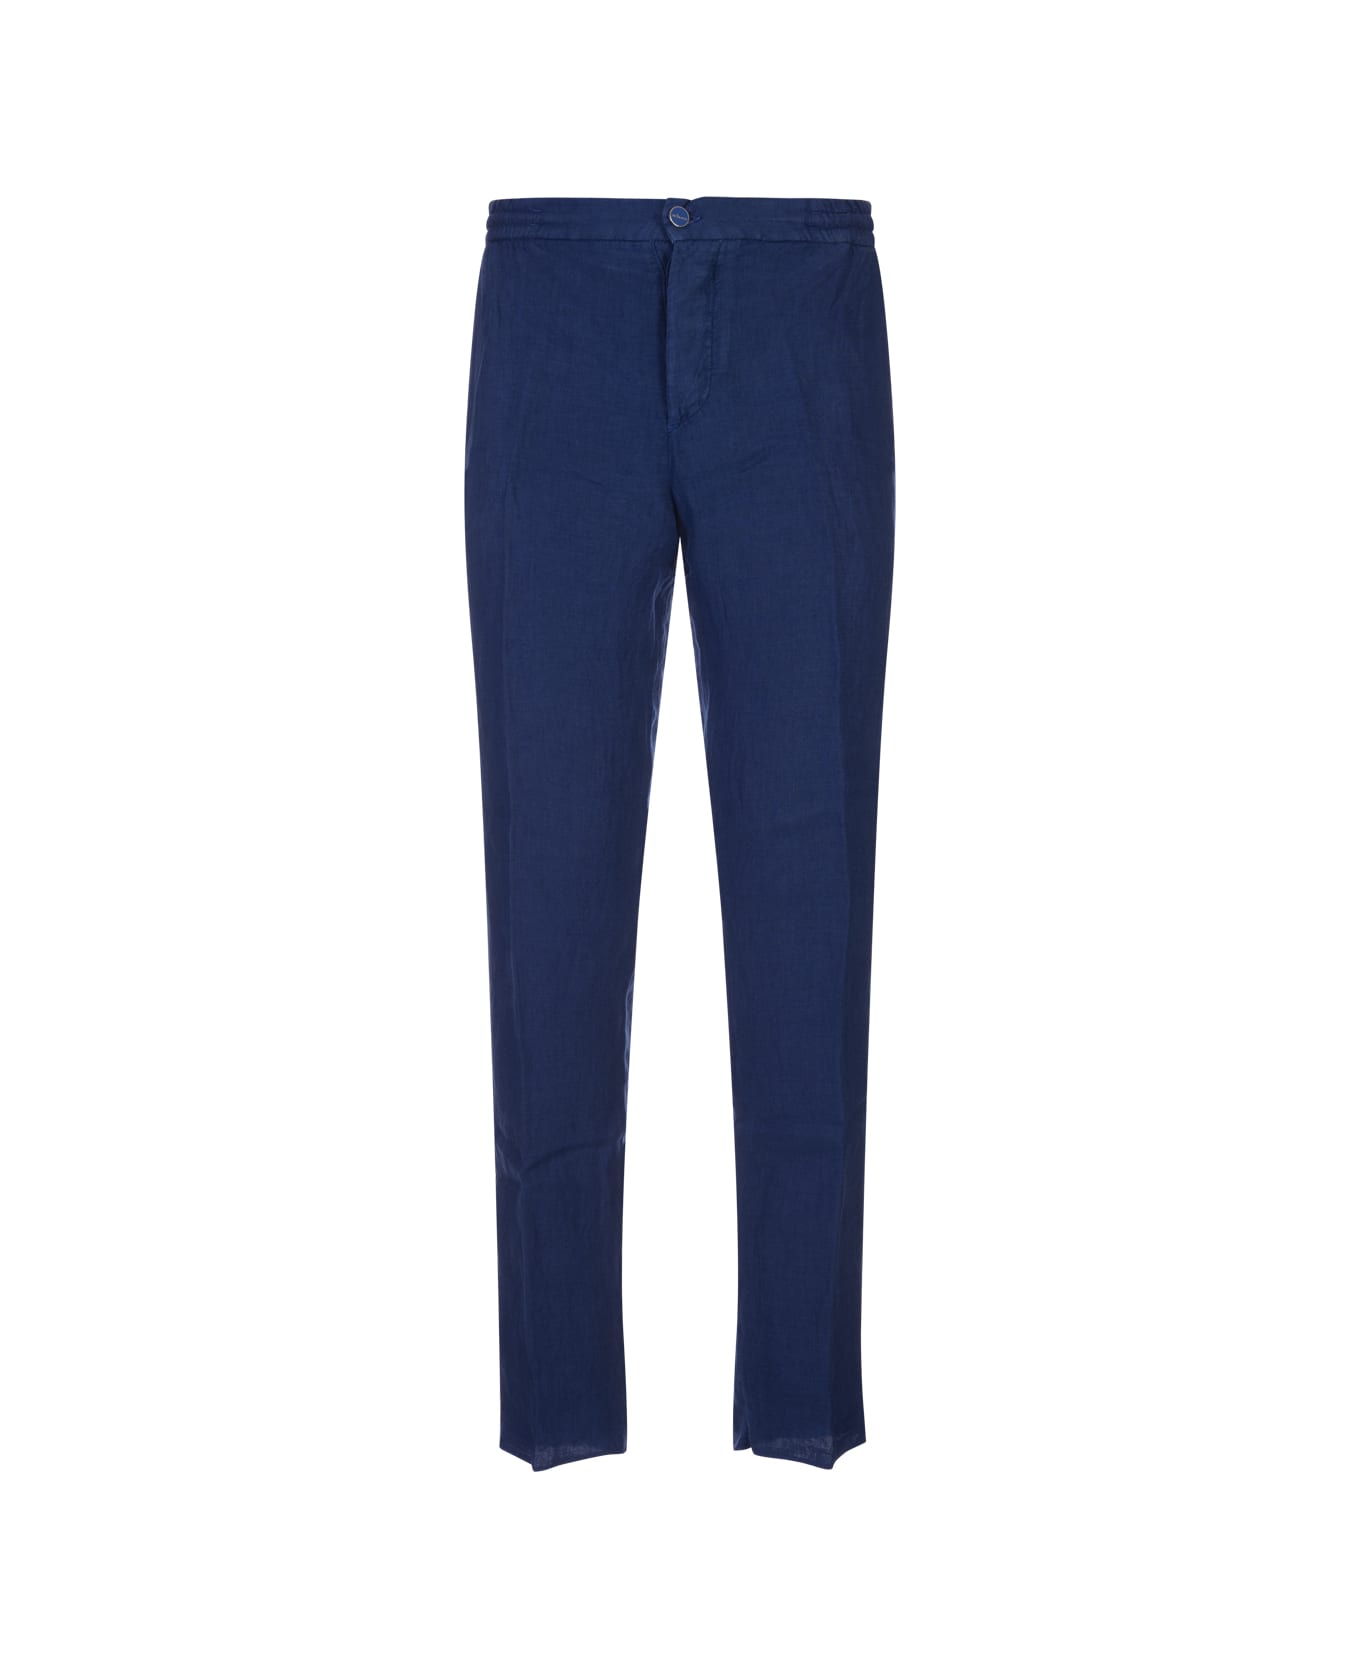 Kiton Cobalt Blue Linen Trousers With Elasticised Waistband - Blue